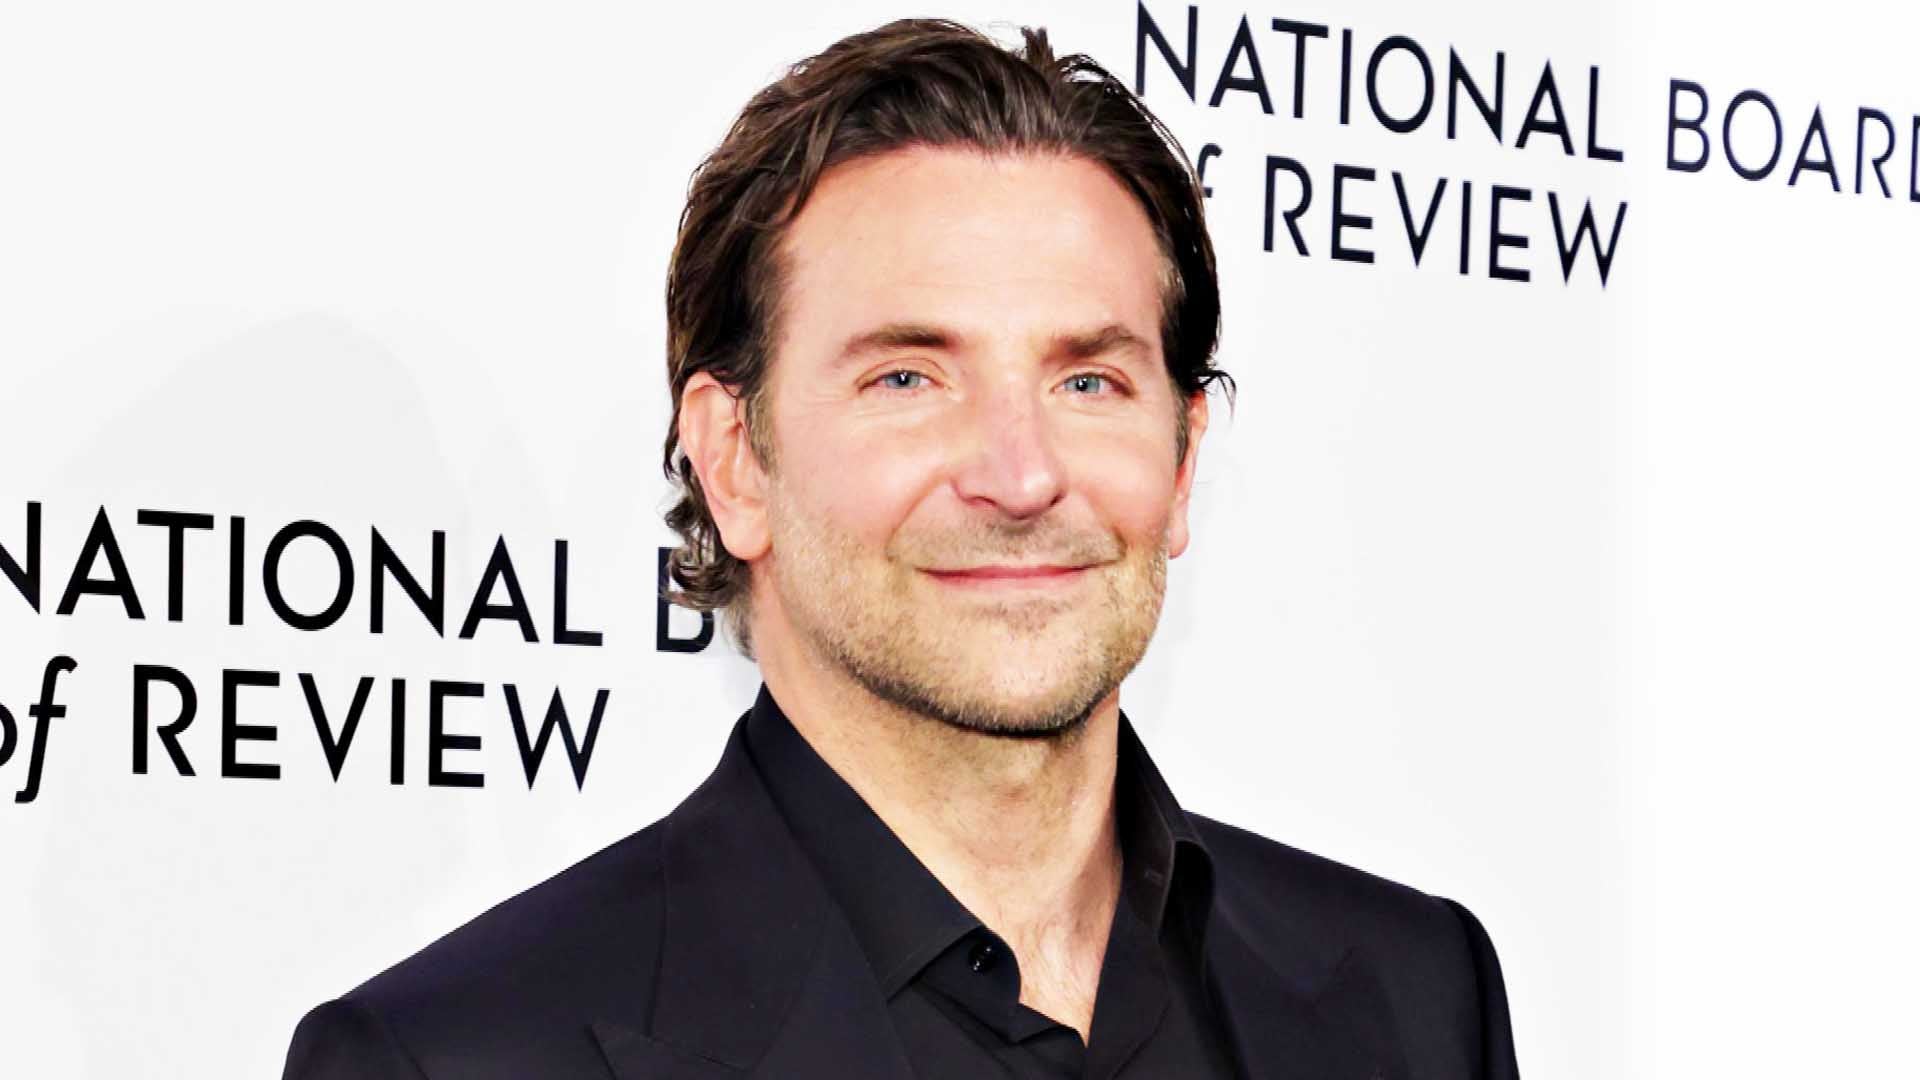 Bradley Cooper opens up about recovering from cocaine addiction